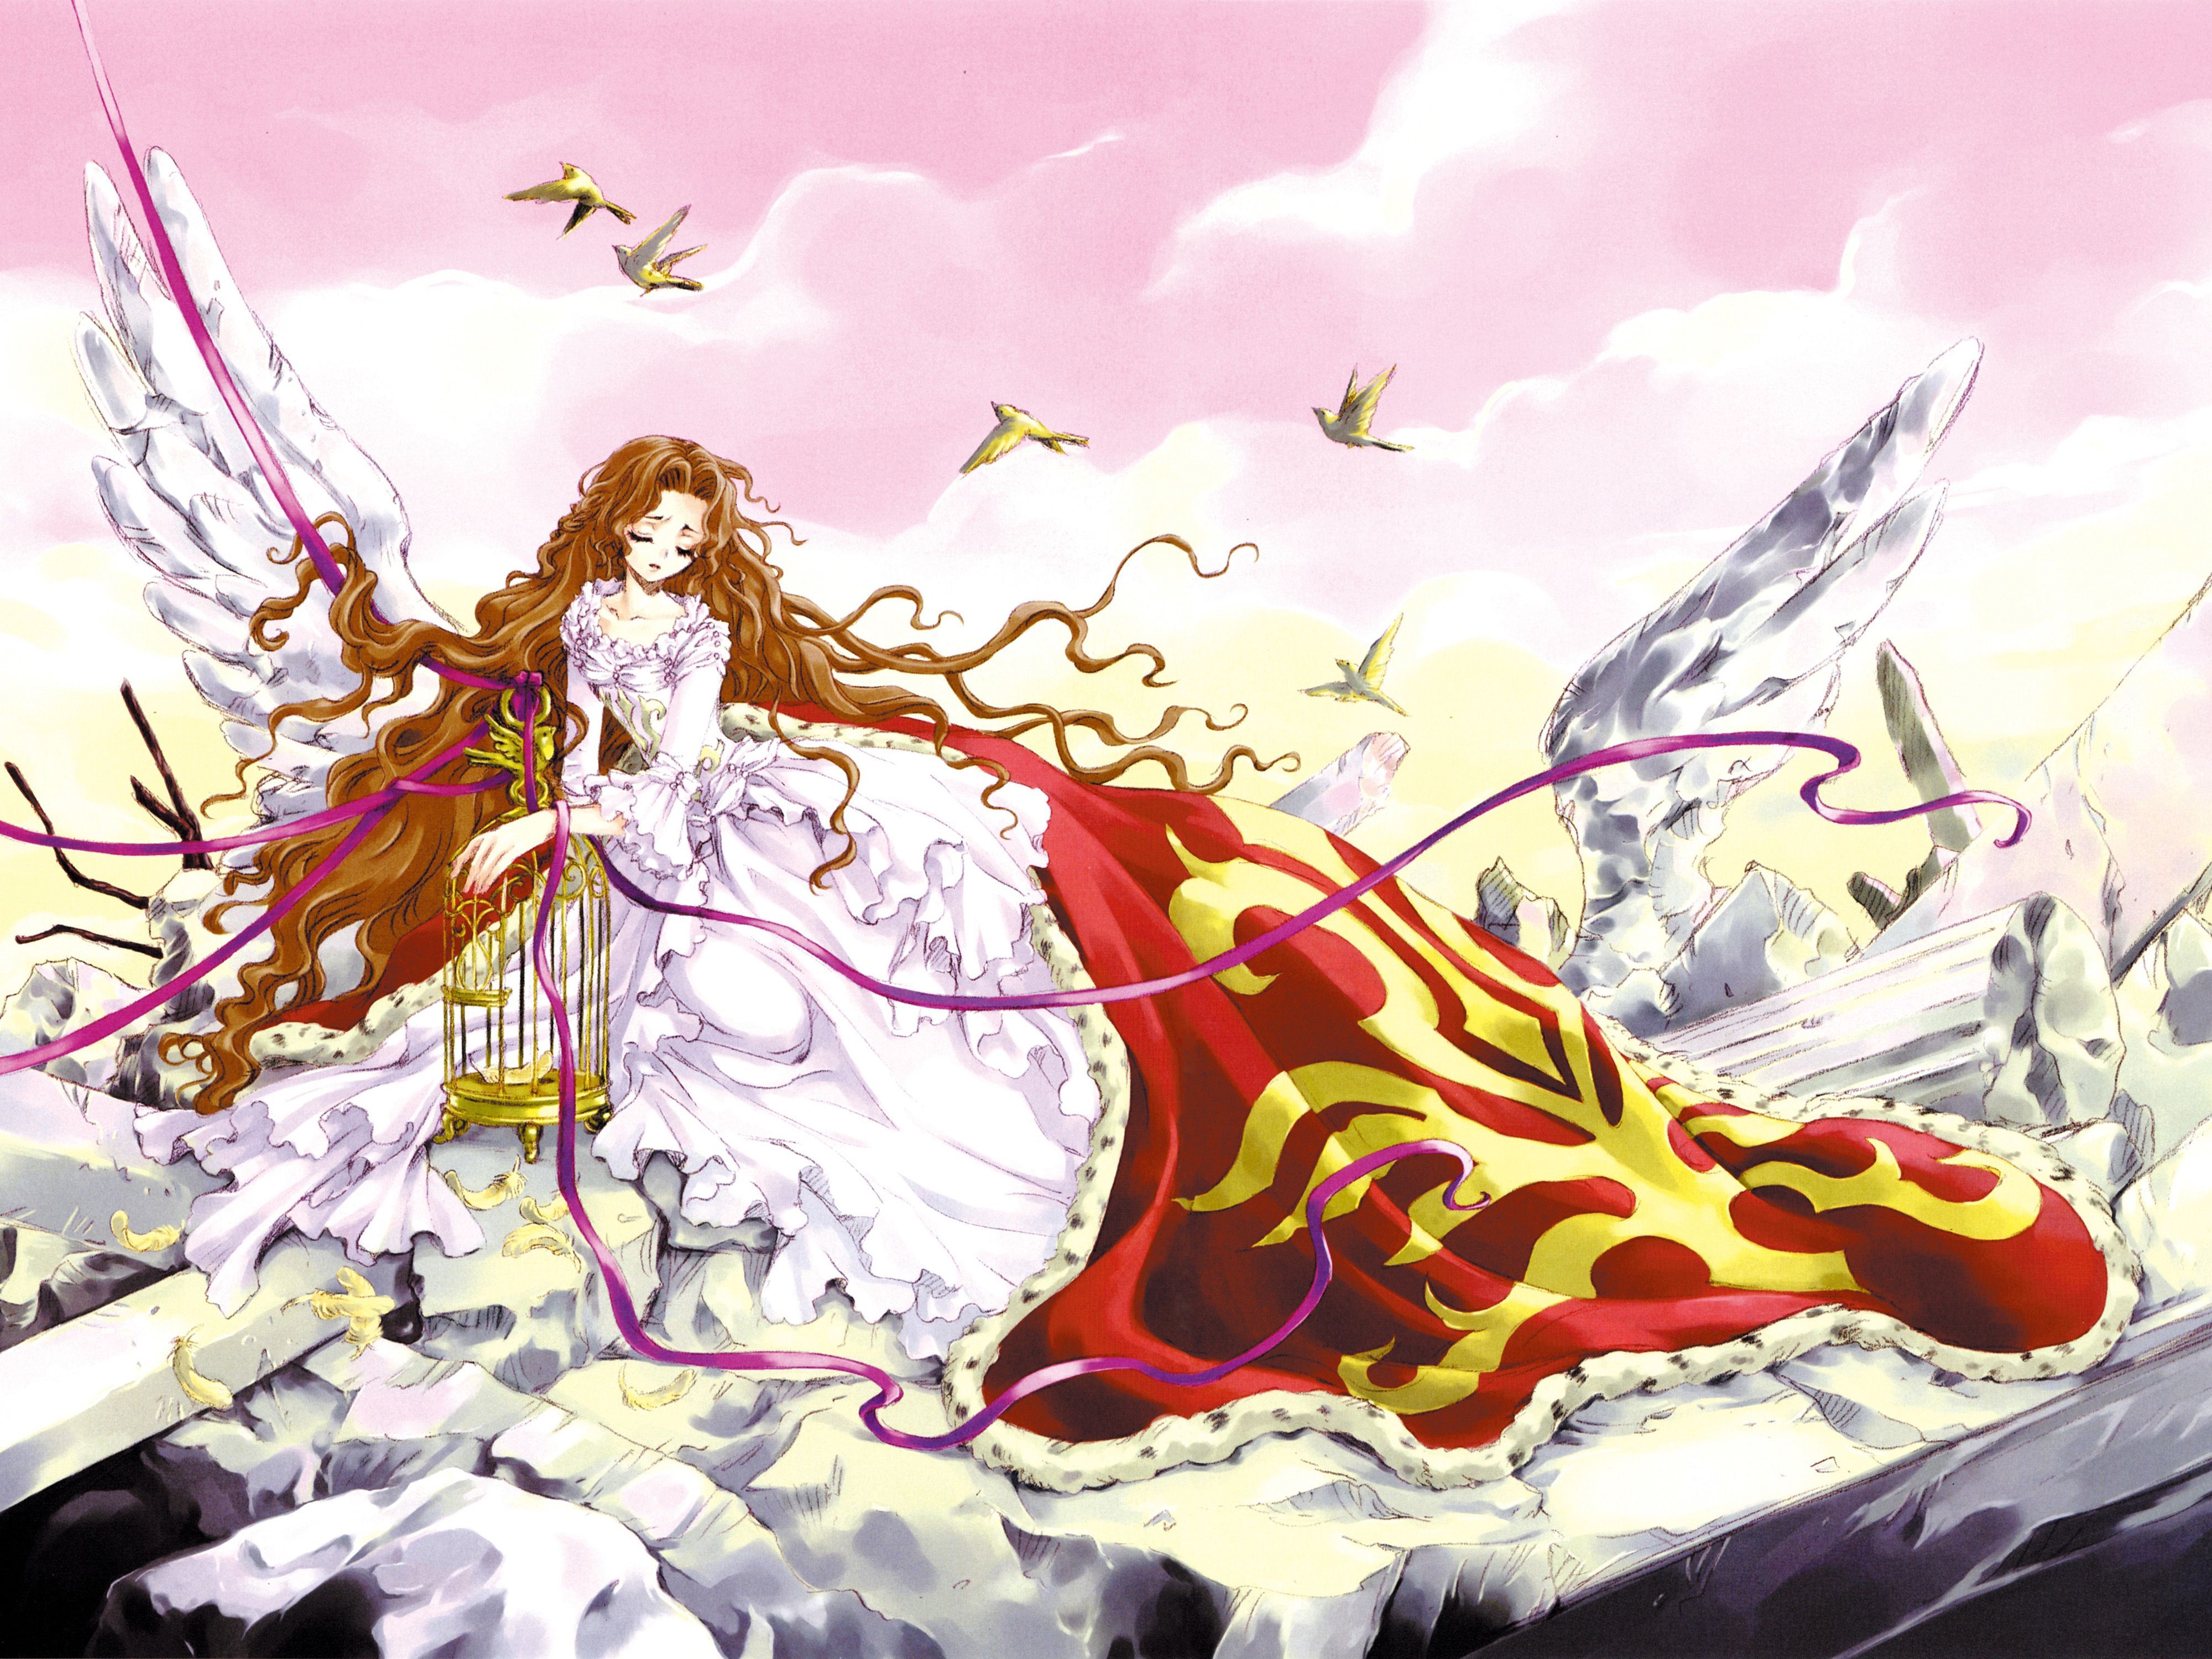 Code Geass Illustration Of Nunnally In A Dress With Rubble By Clamp